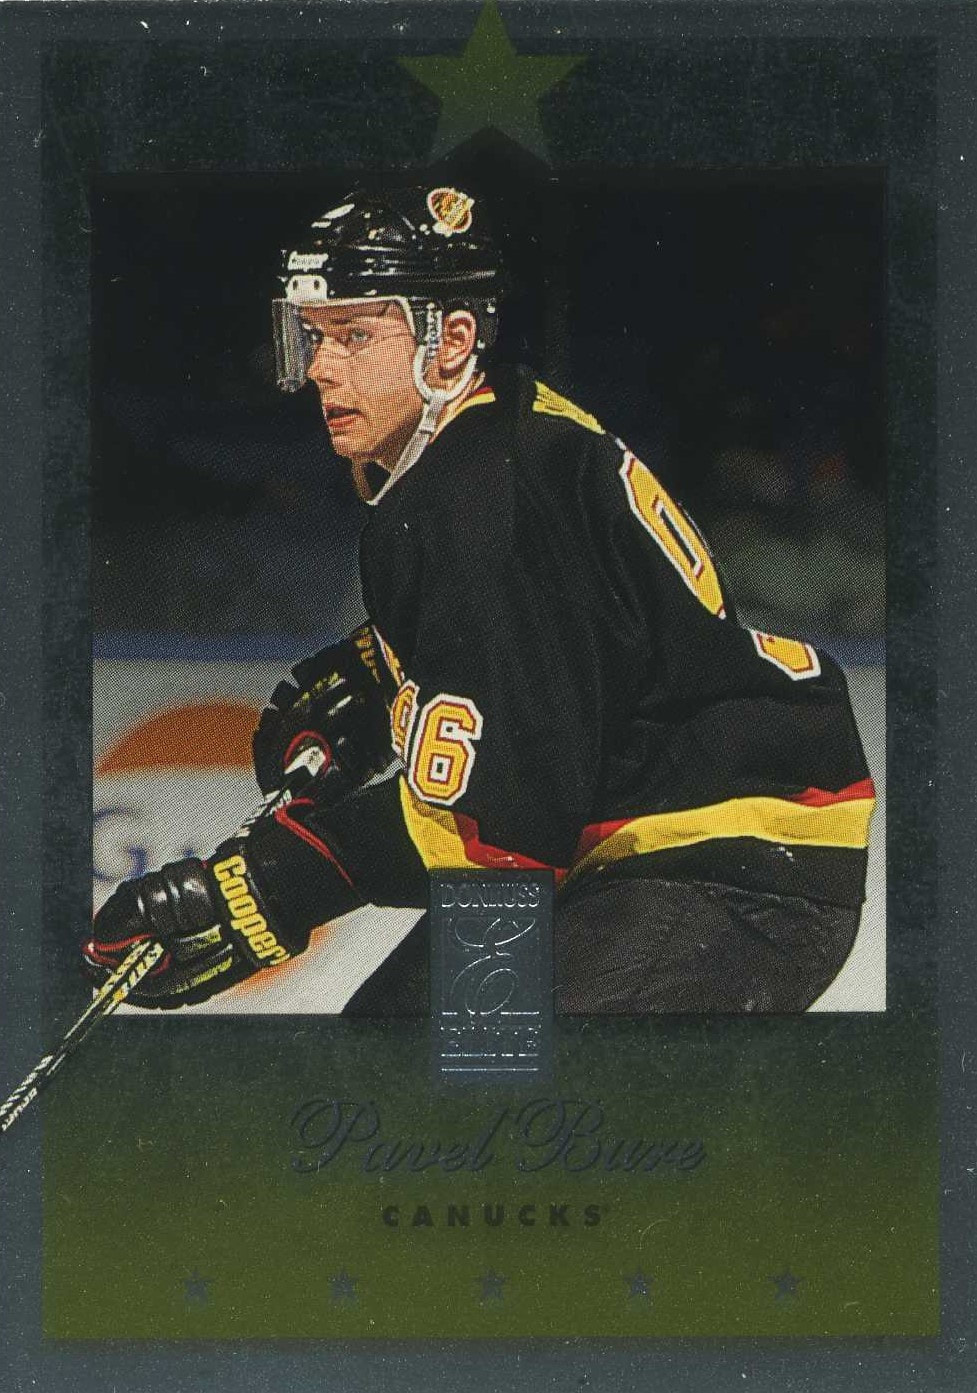 1996 Metal Universe Lethal Weapon Super Power Pavel Bure! . . . . .  #thehobby #whodoyoucollect #collectwhatyoulike #sports #sportscards…